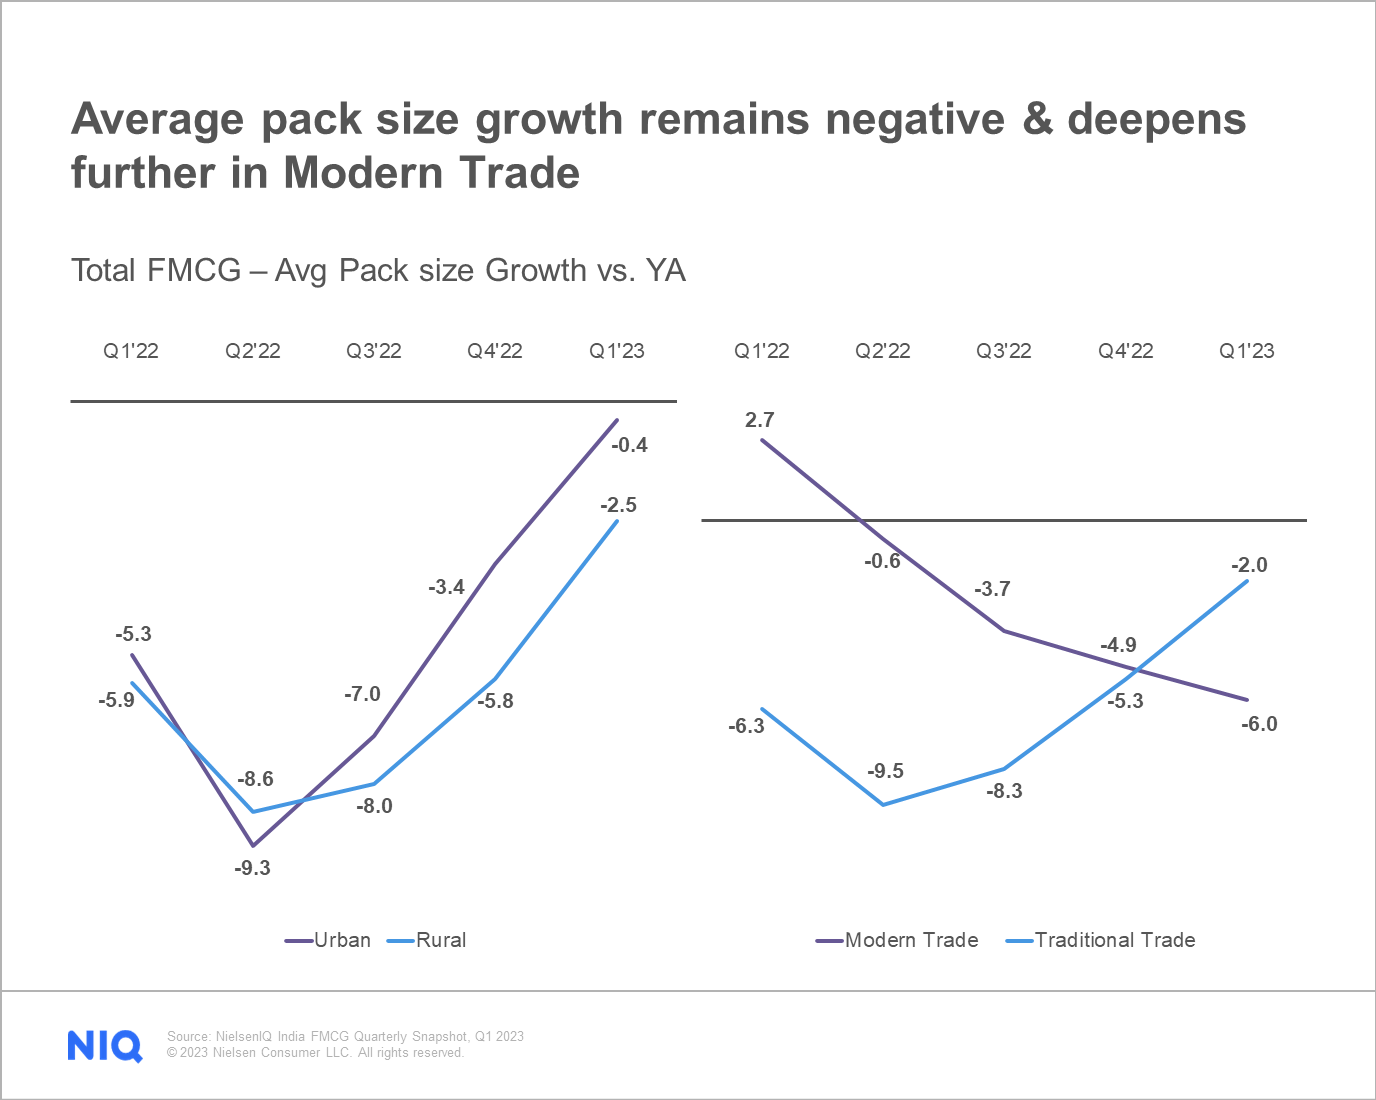 Average pack size growth remains negative across markets & deepens further in Modern Trade